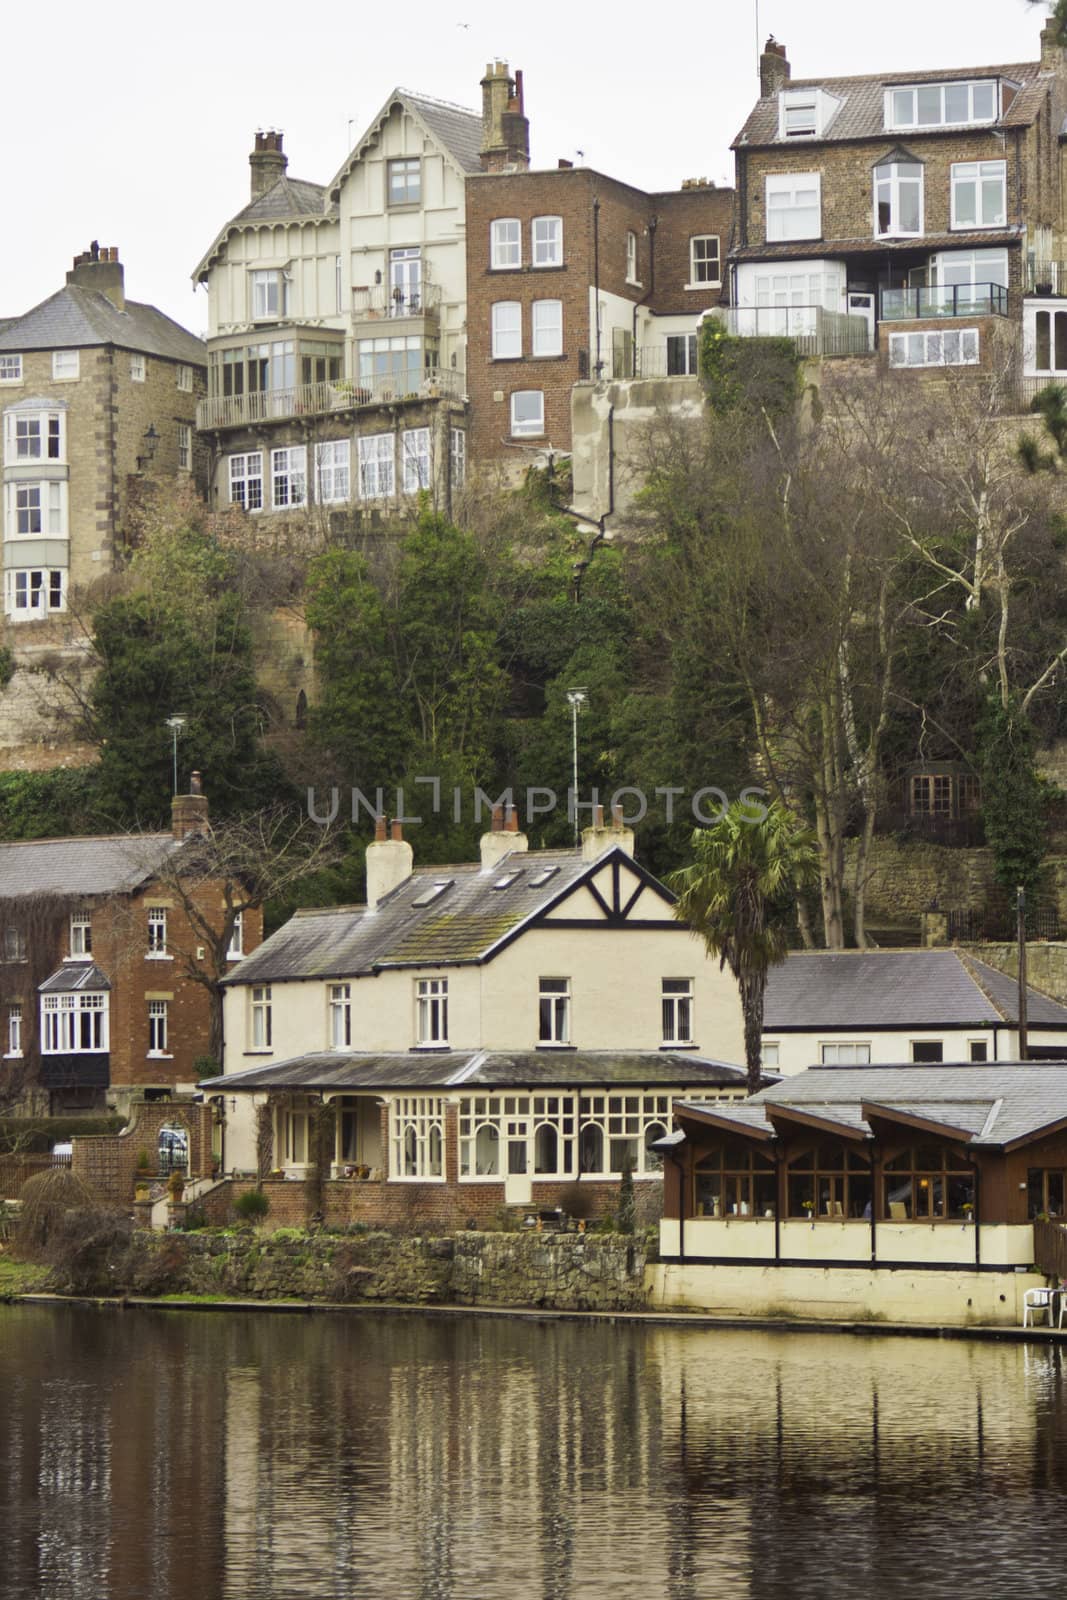 Town of Knaresborough, England, with its quiant historical houses reflected in the water of the river below